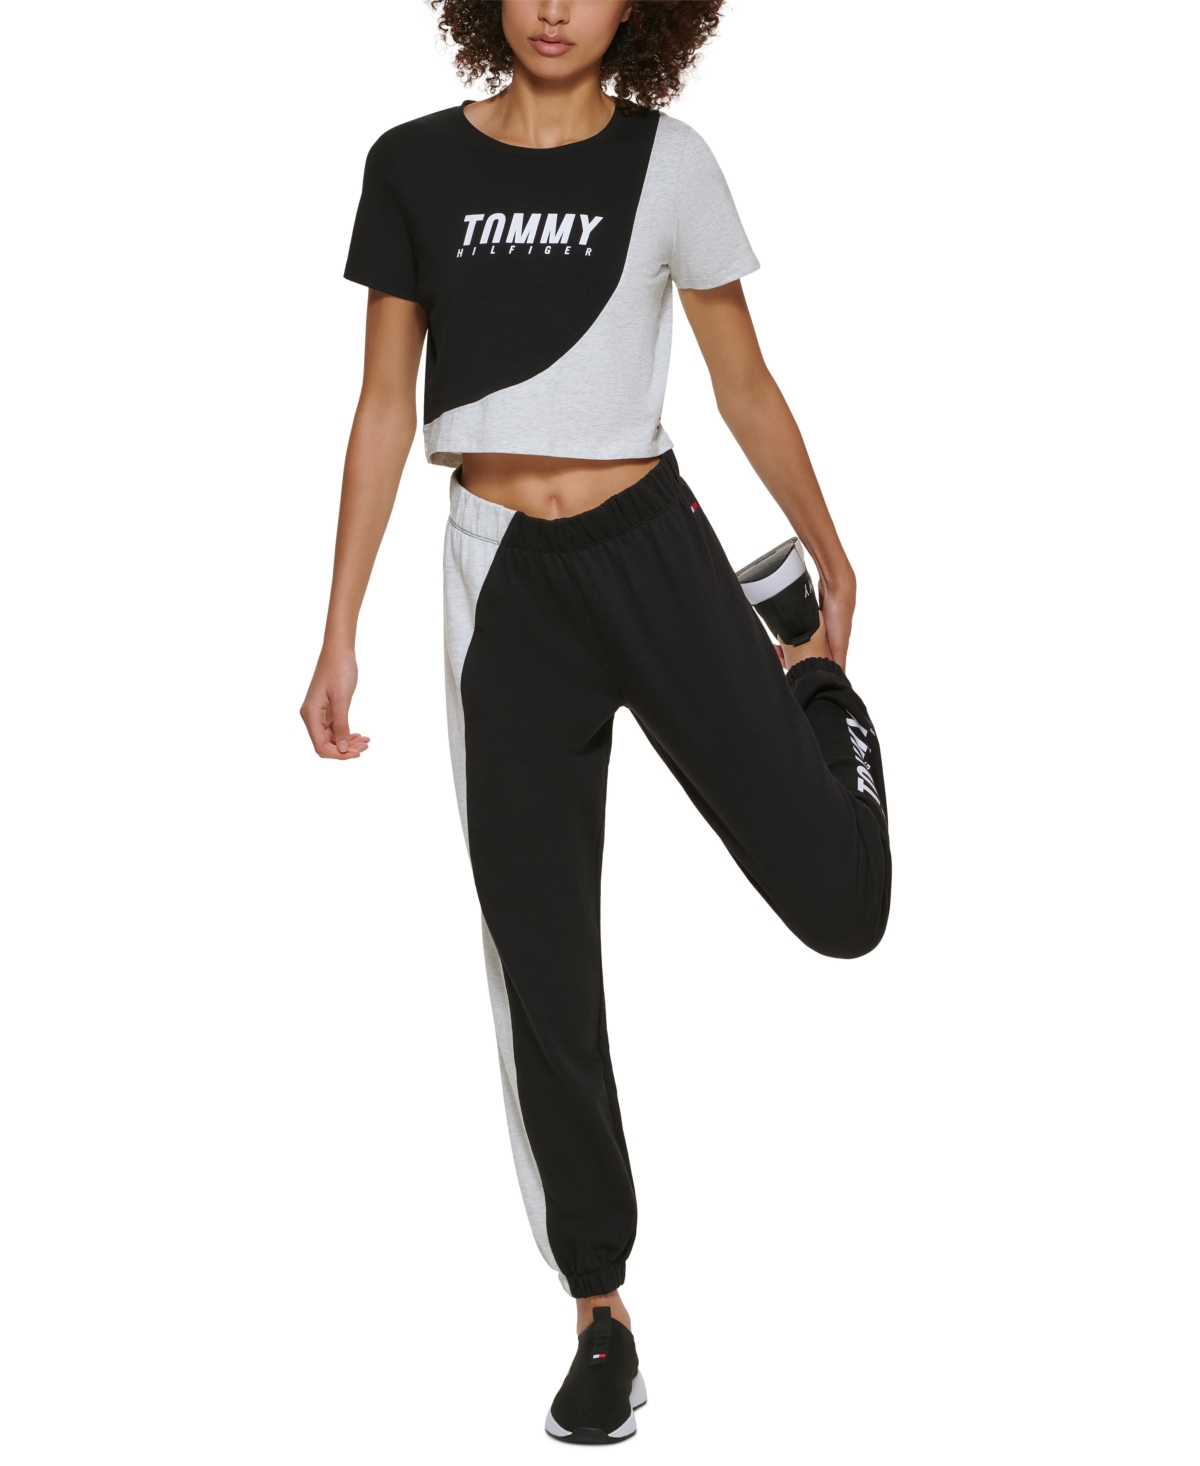 Tommy Hilfiger Sport Colorblocked Cropped T-shirt In Black/heather Grey